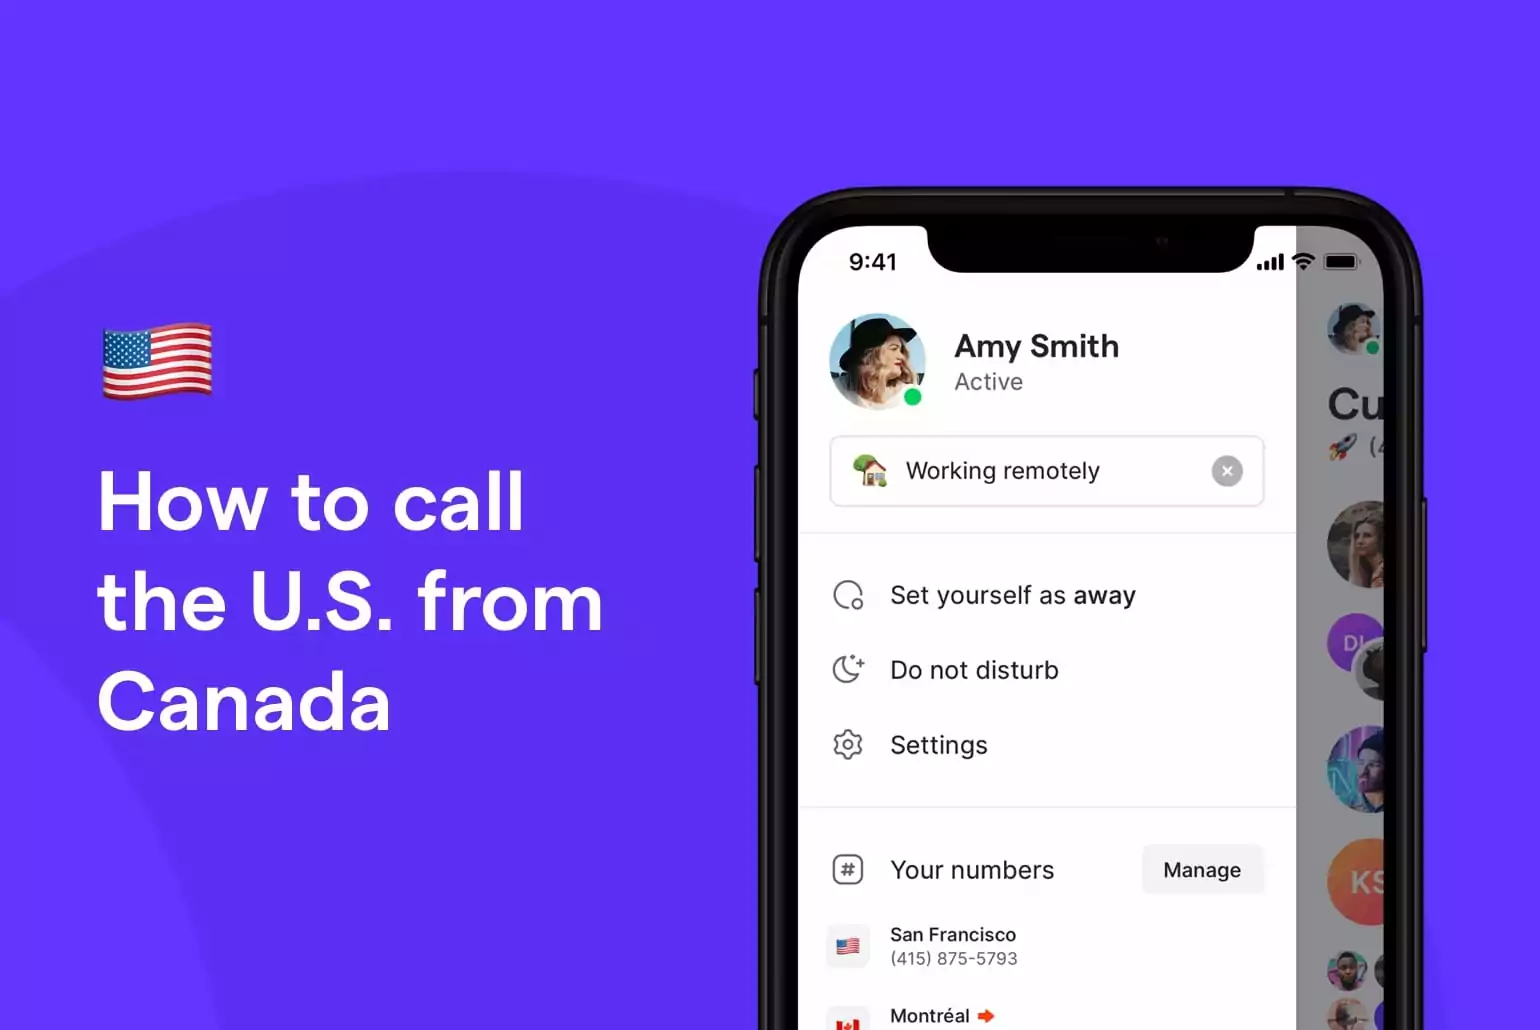 Calling U.S. from Canada: How to call the simplest way possible